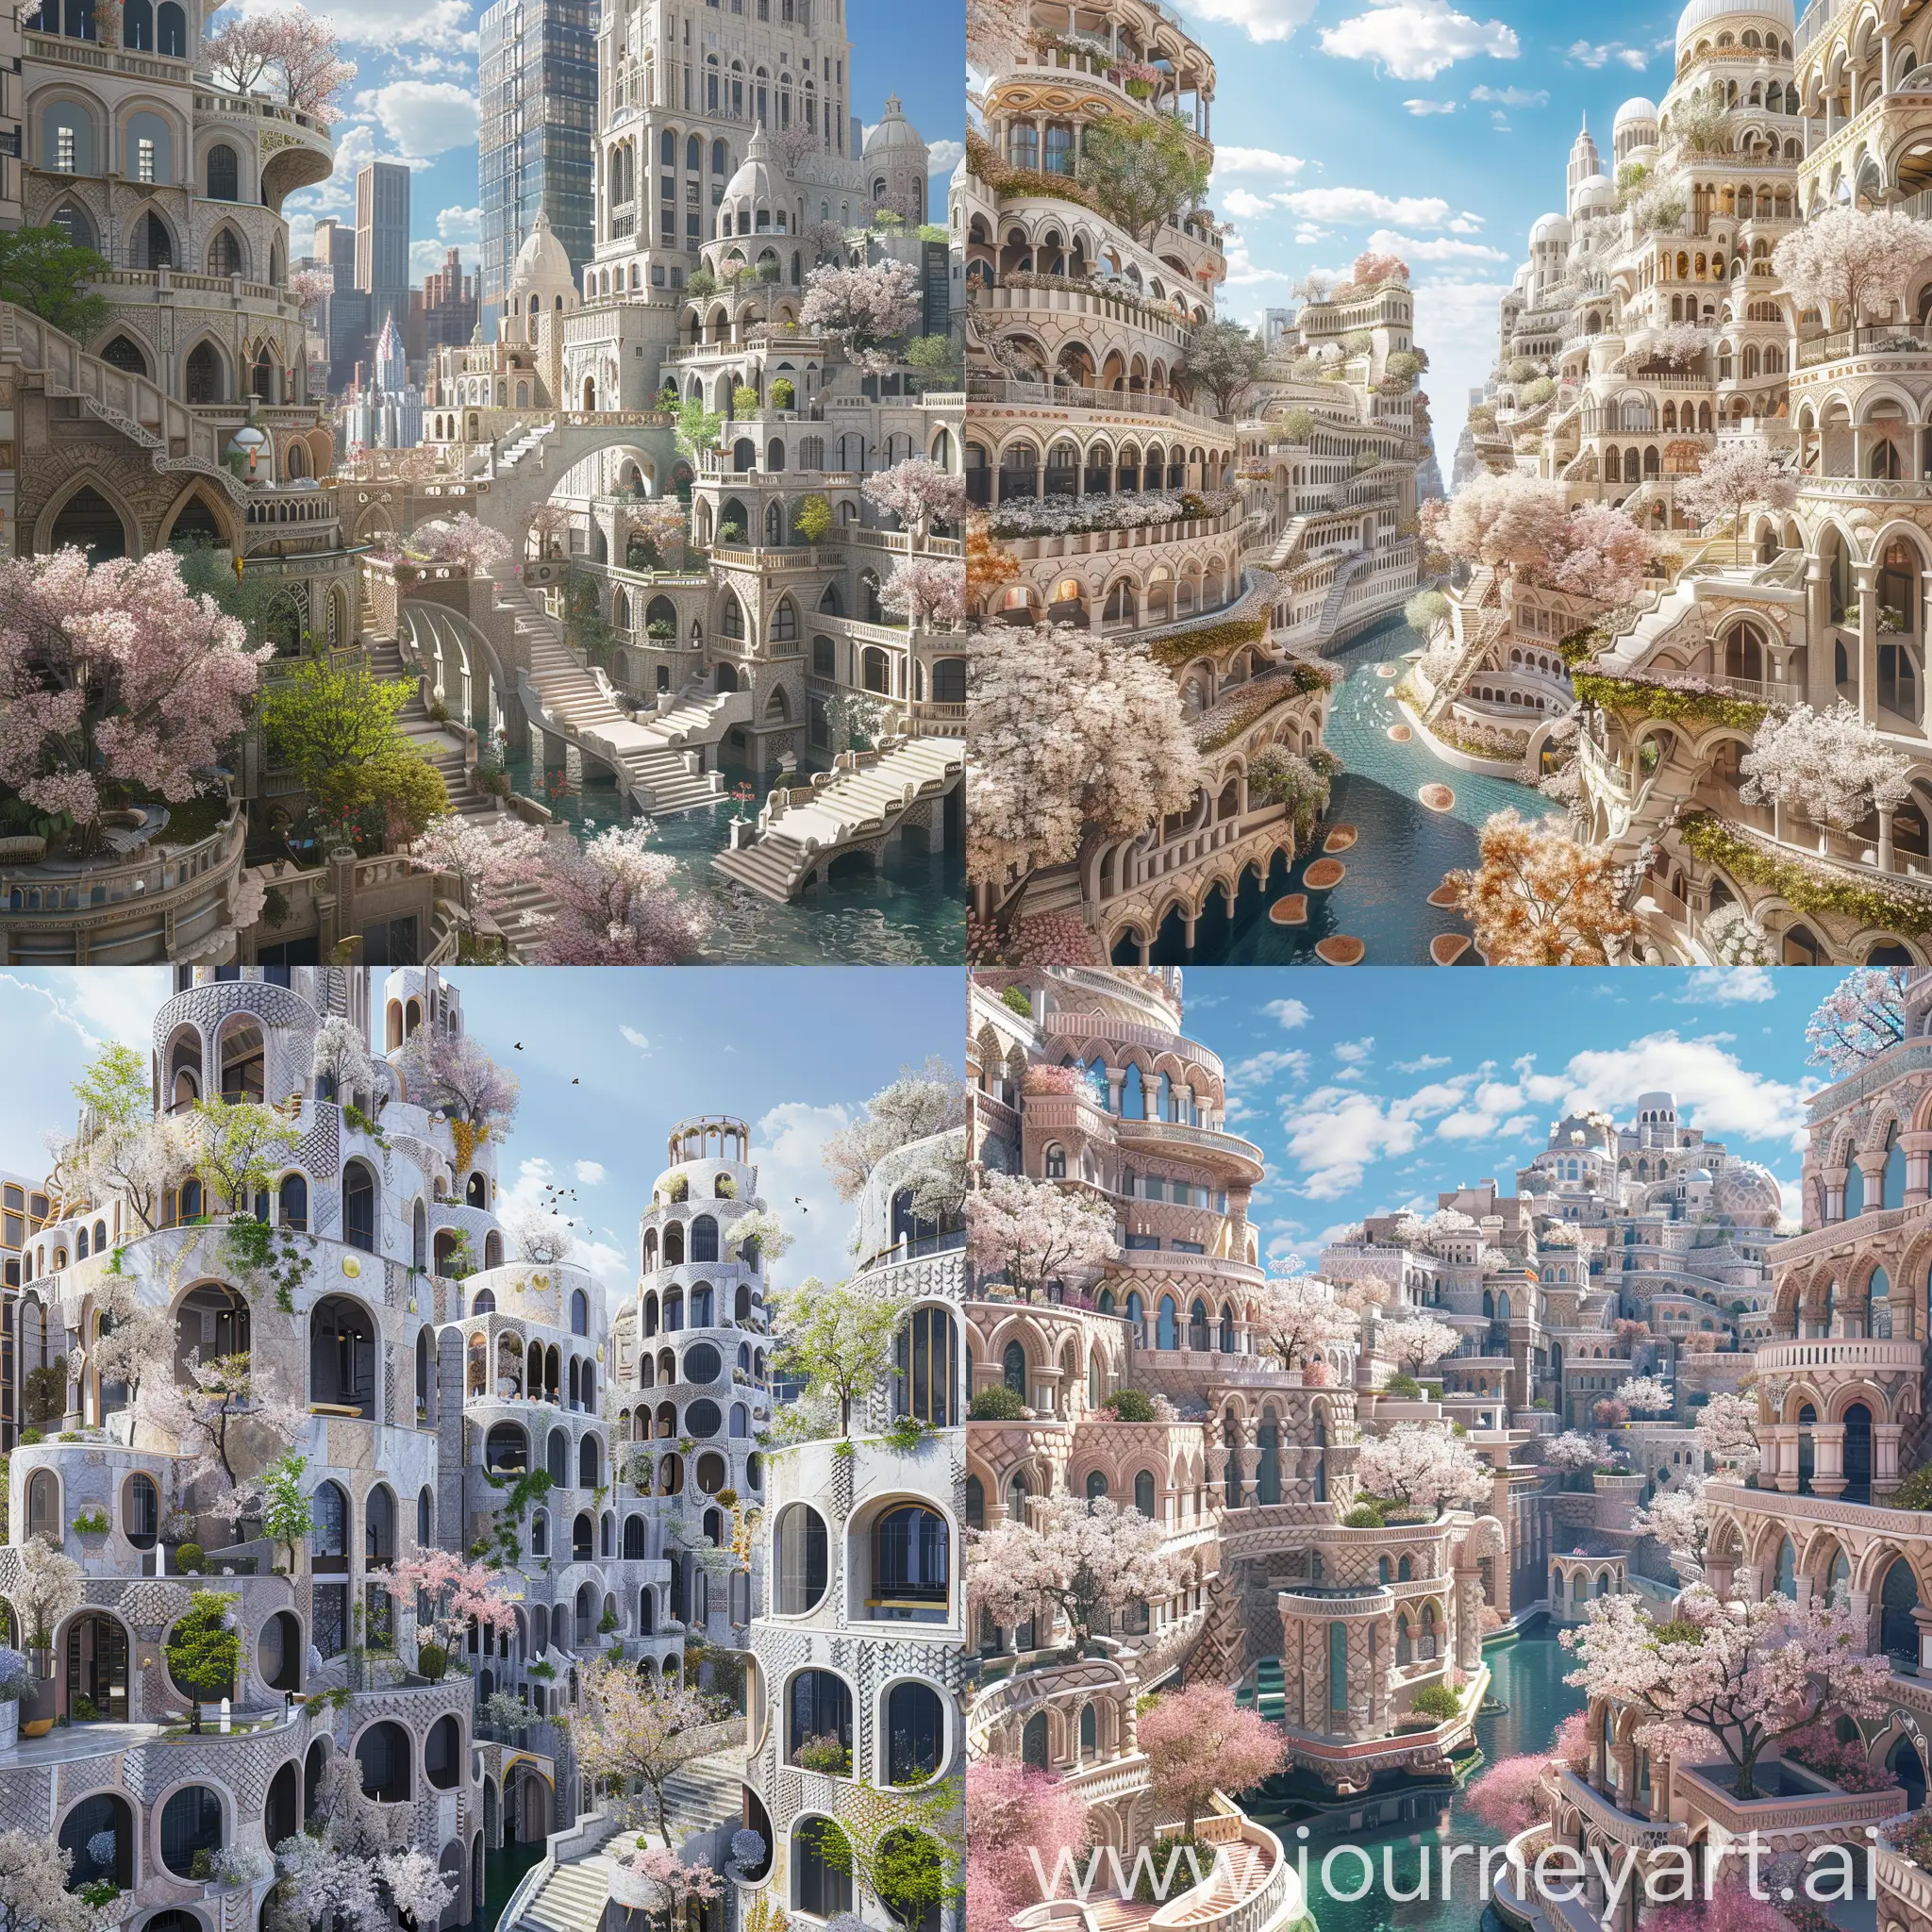 Futuristic-Metropolis-with-Traditional-Architecture-and-Blossoming-Trees-in-Spring